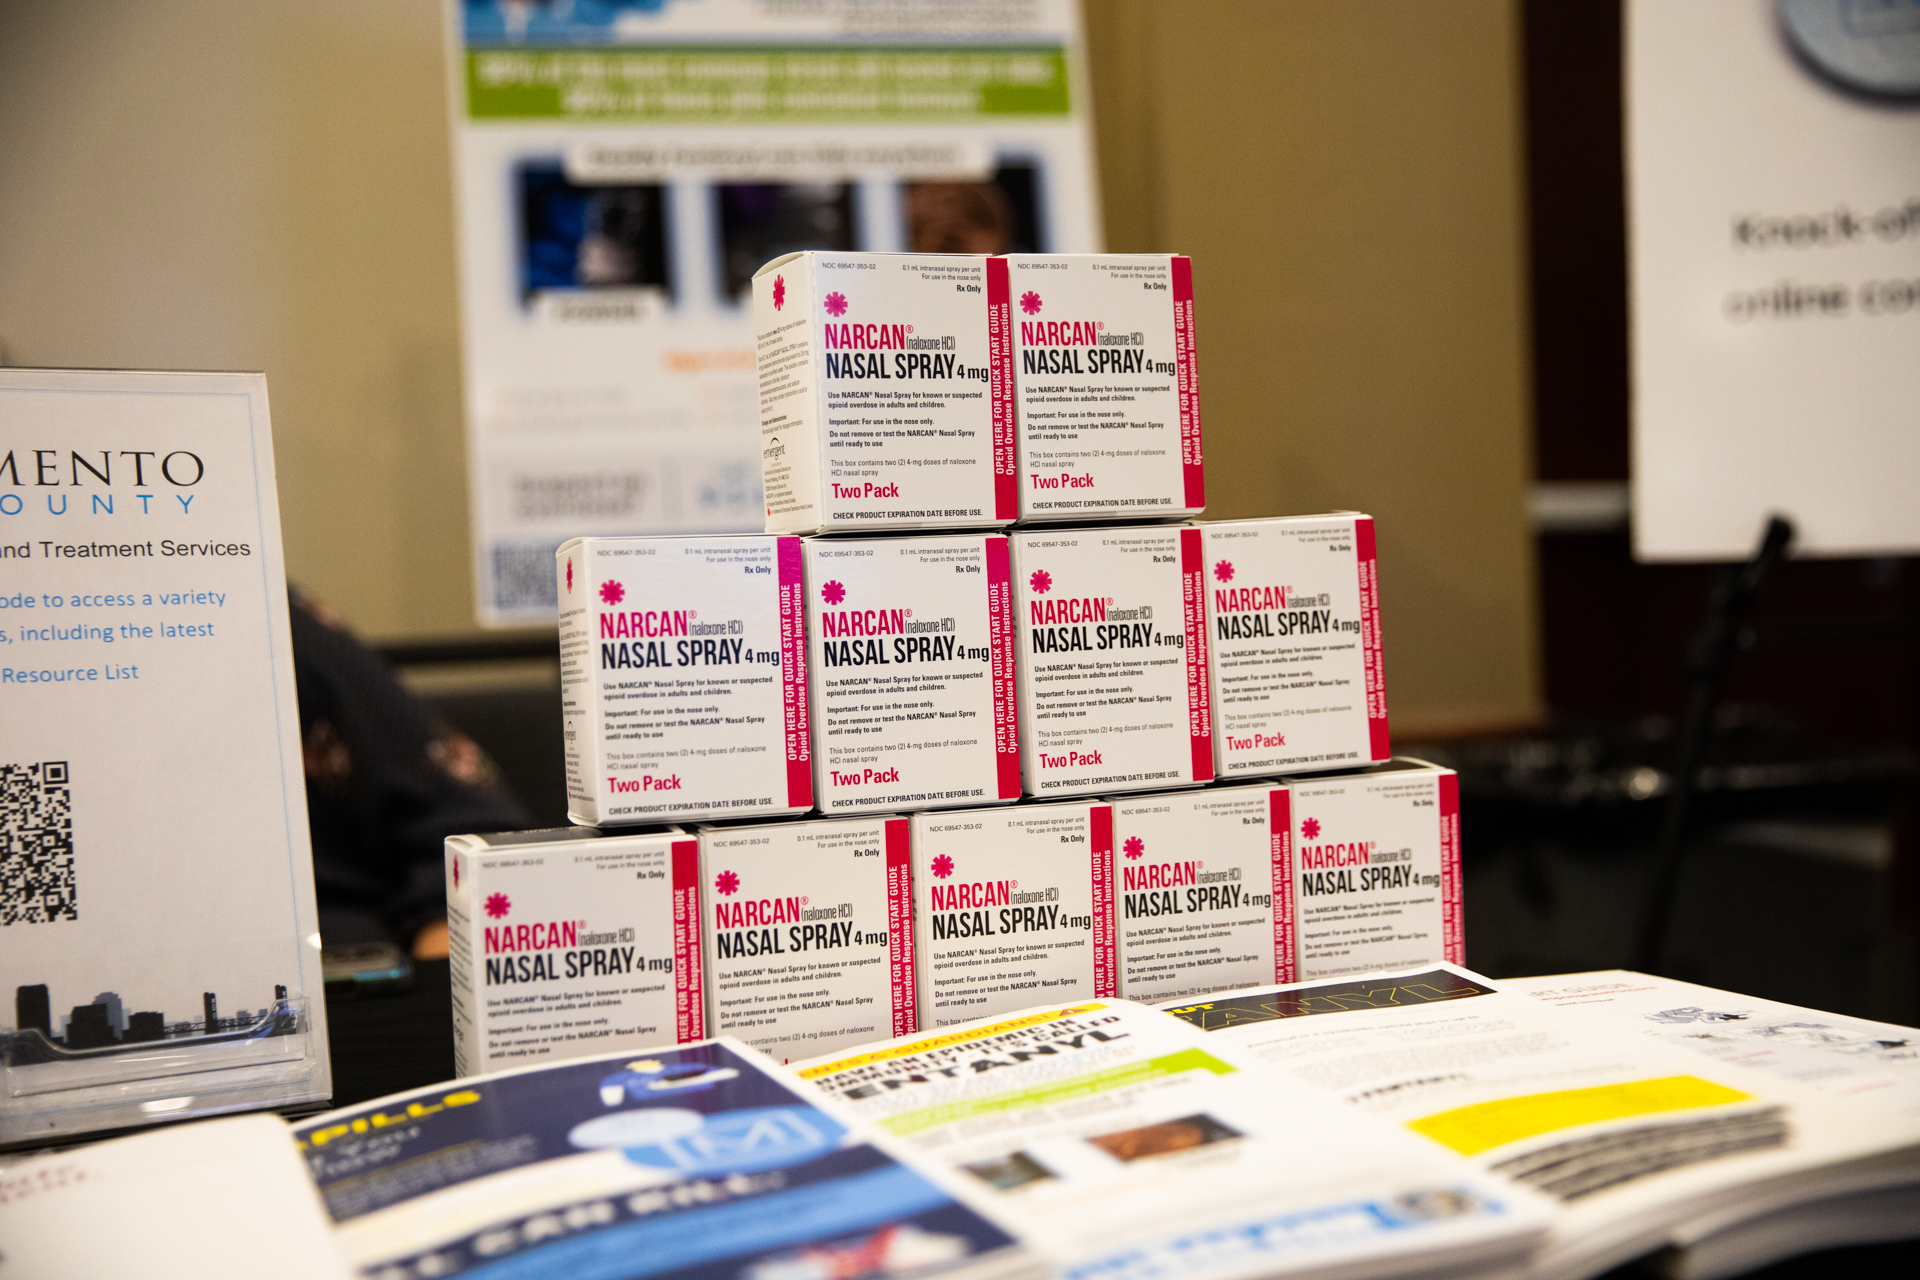 Boxes of Narcan, a nasal spray that can reverse opioid overdoses, sit atop an information table at the Opioid Awareness Summit at Sac State.